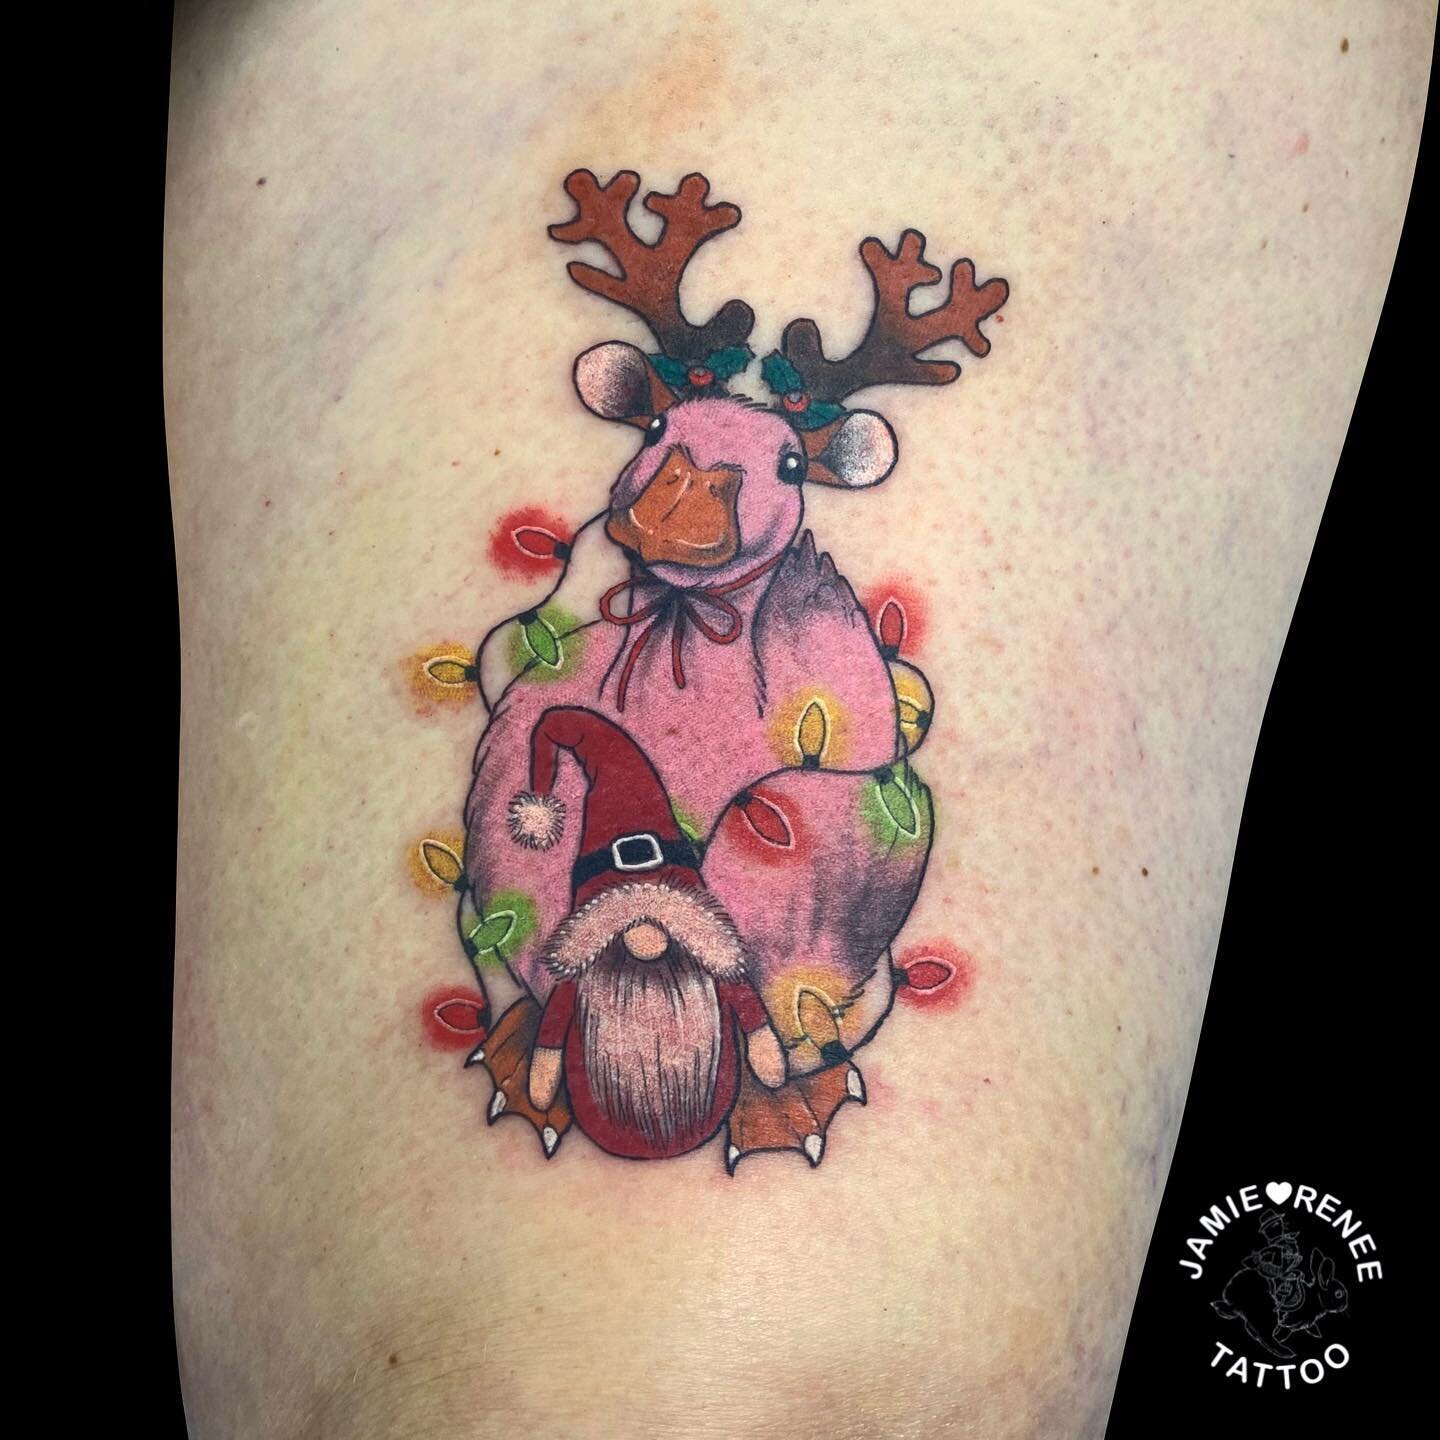 🎄🦆Christmas Duck for Eloise!🦆🎄 Another addition to the ducky collection! Thank you so much, always lovely to see you. 😍❤️ @stencil.jam @kwadron @rawpigments @drmorsetattoo #tattoo #tattooartist #femaletattooartist #ladytattooer #nztattoo #wellin